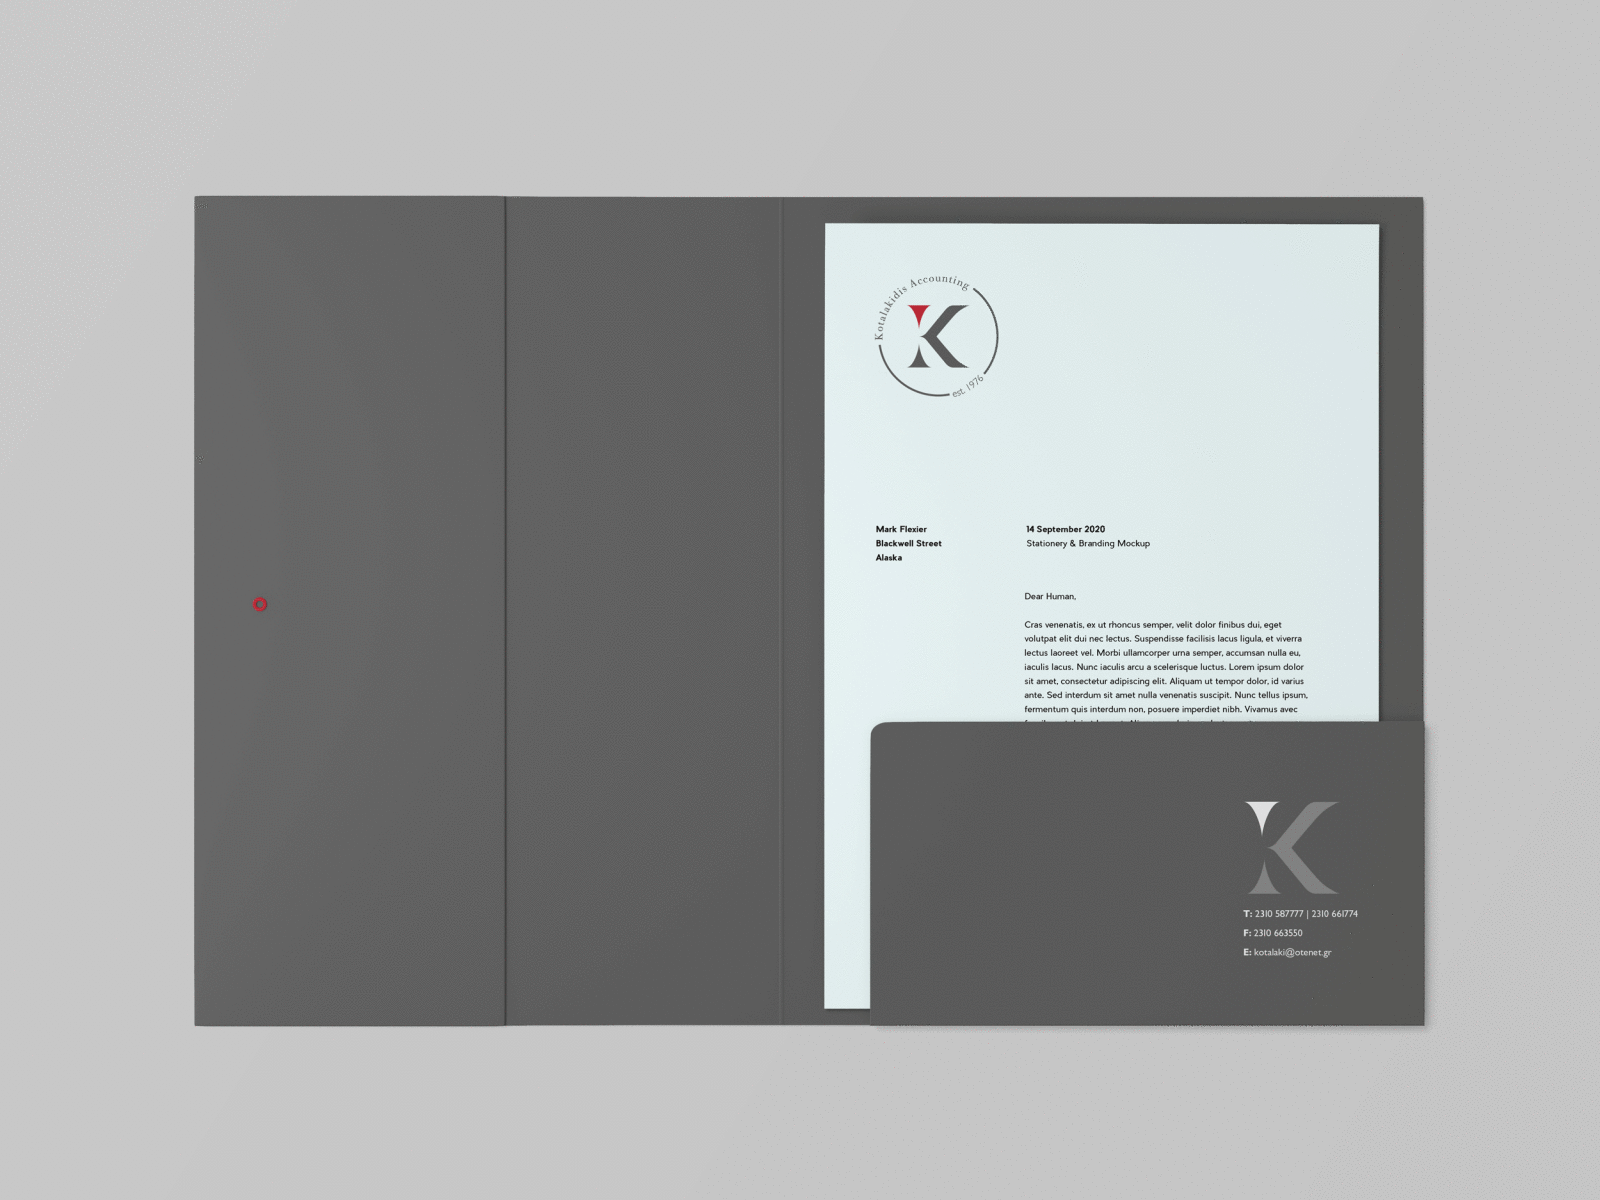 Folder for accounting office accounting branding design folder folder design folder mockup